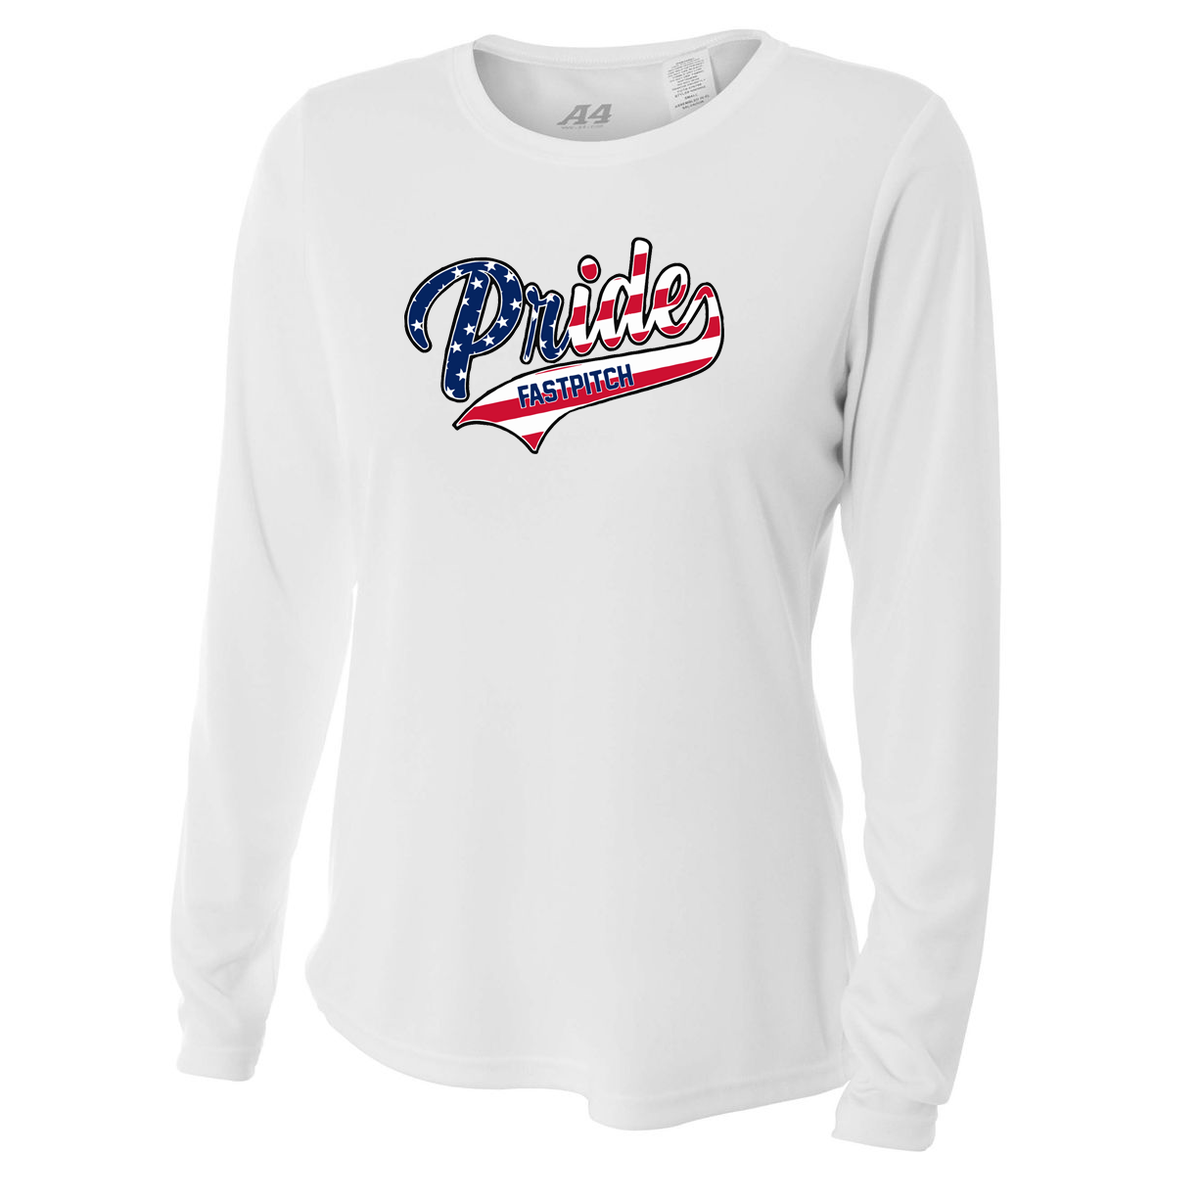 Long Island Pride Fastpitch Women's Long Sleeve Cooling Performance Crew